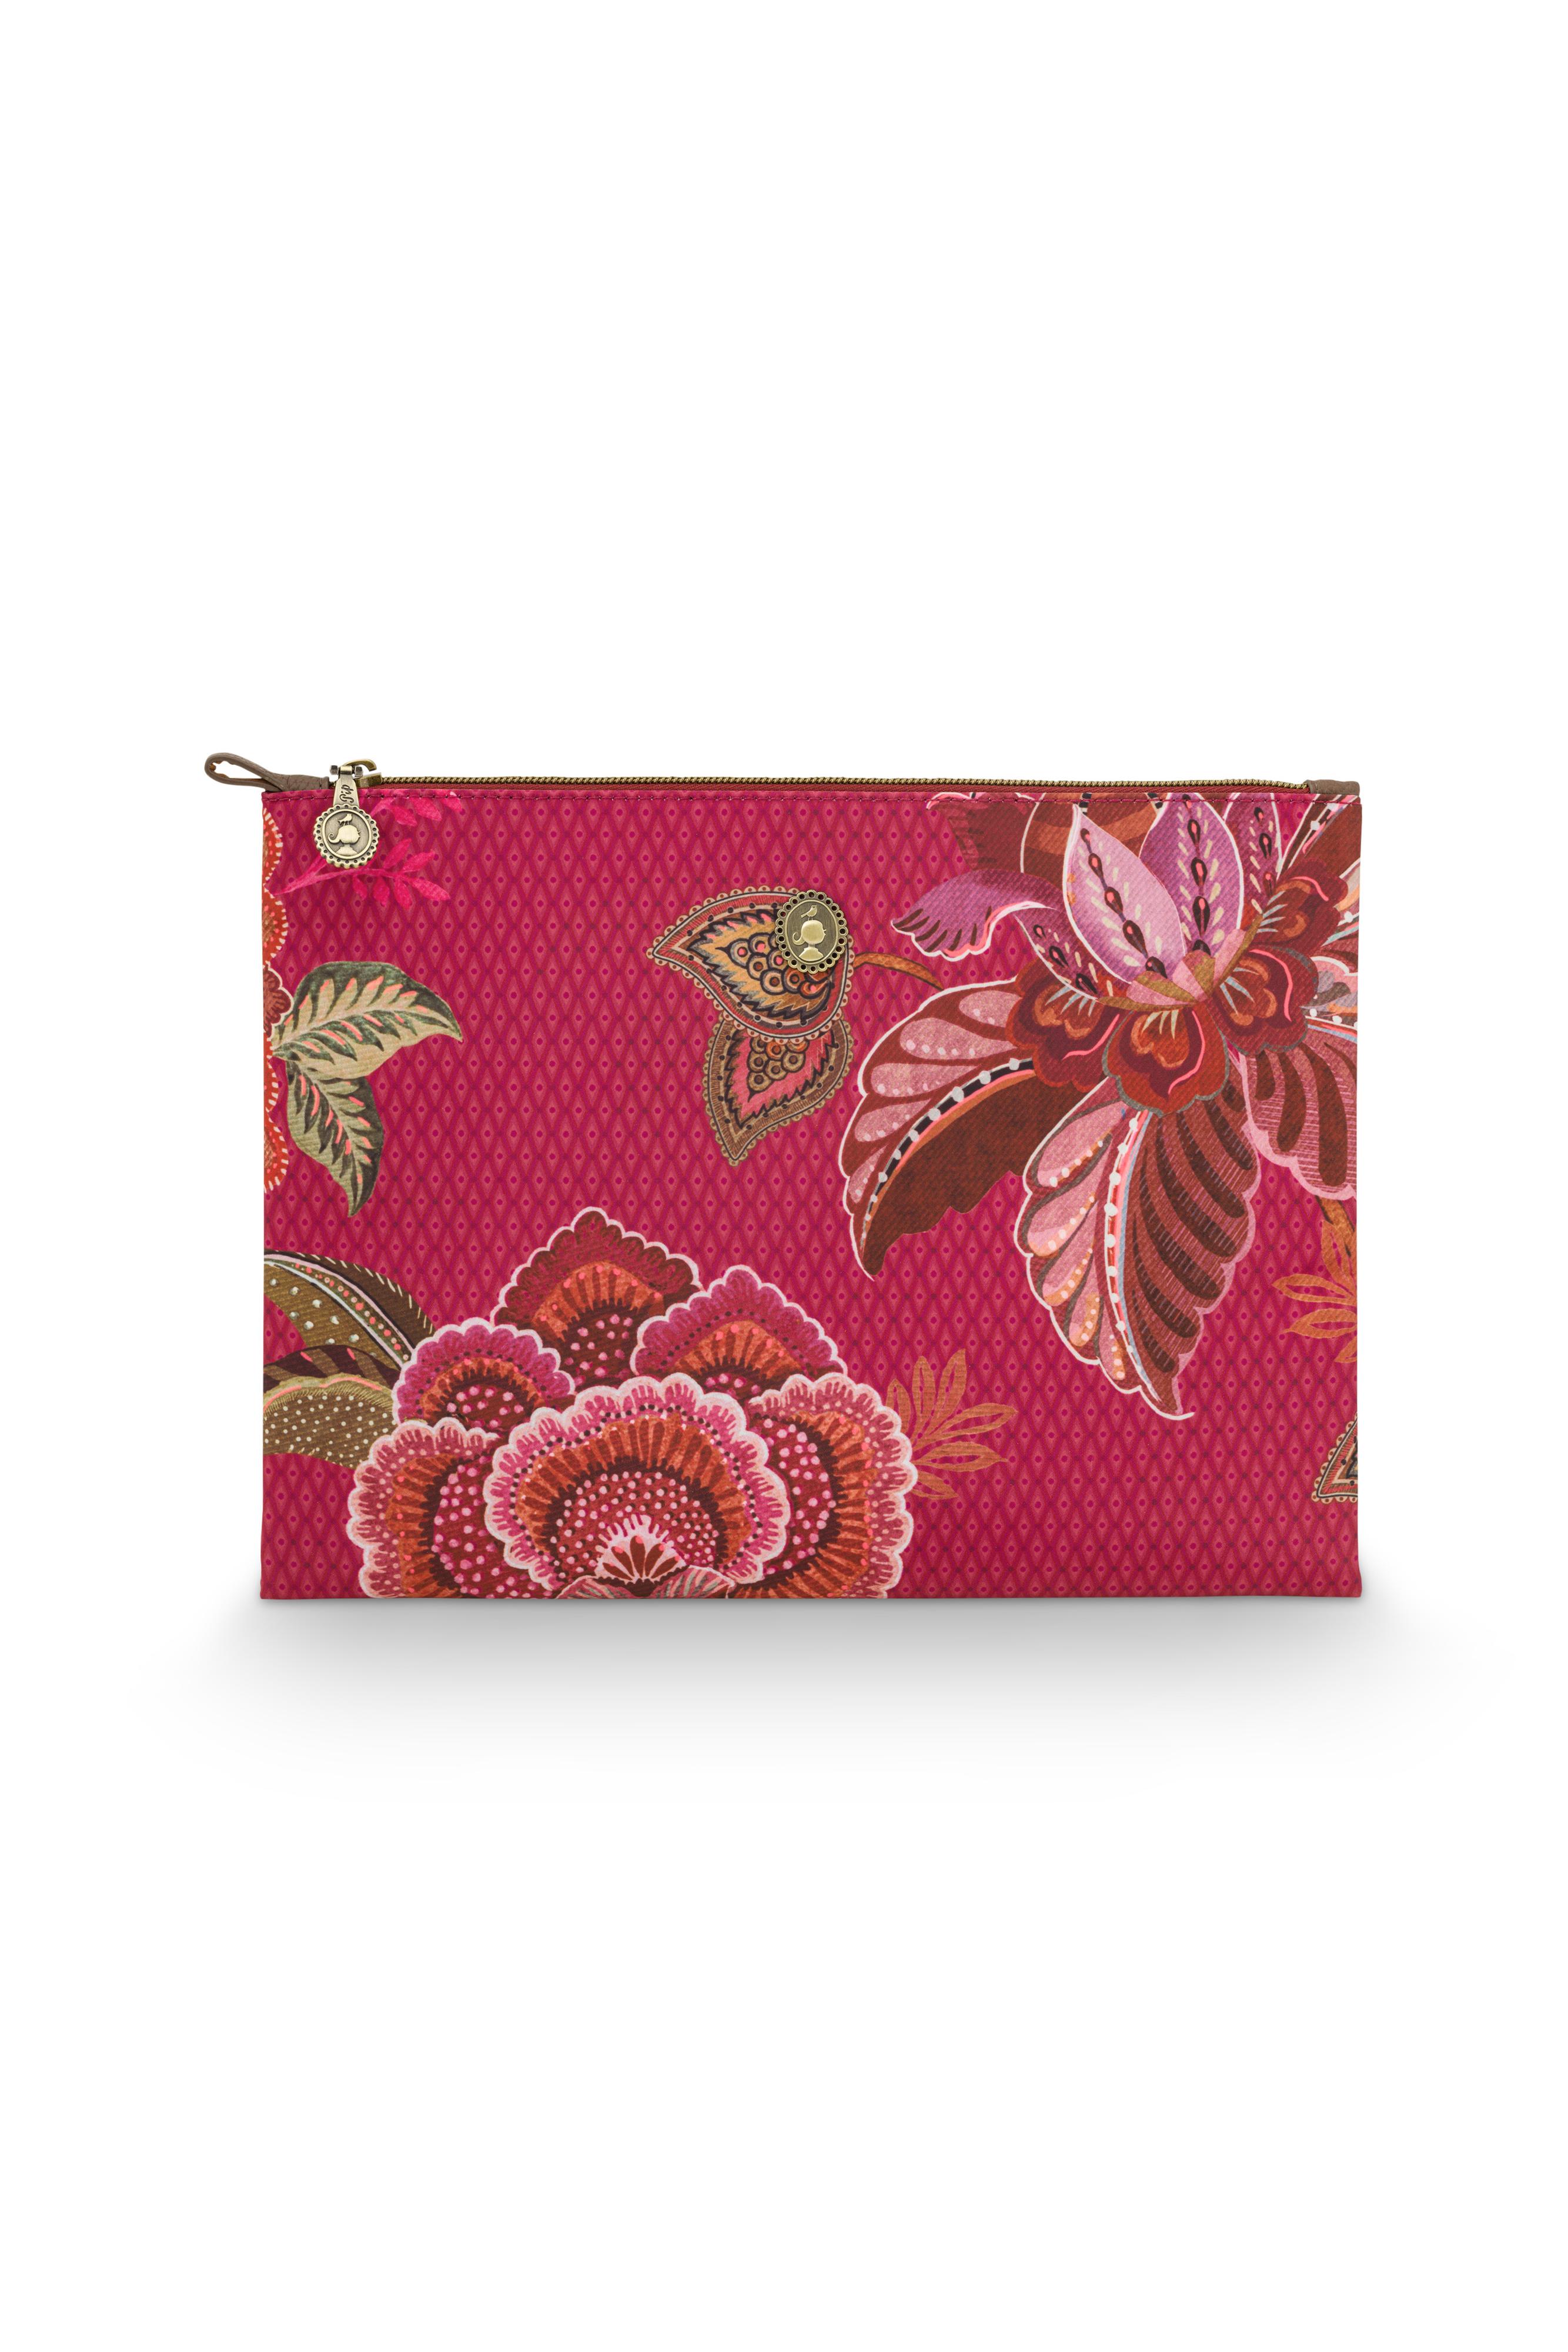 Charly Cos Flat Pouch Lge Cece Fiore Red 30x22x1cm Gift